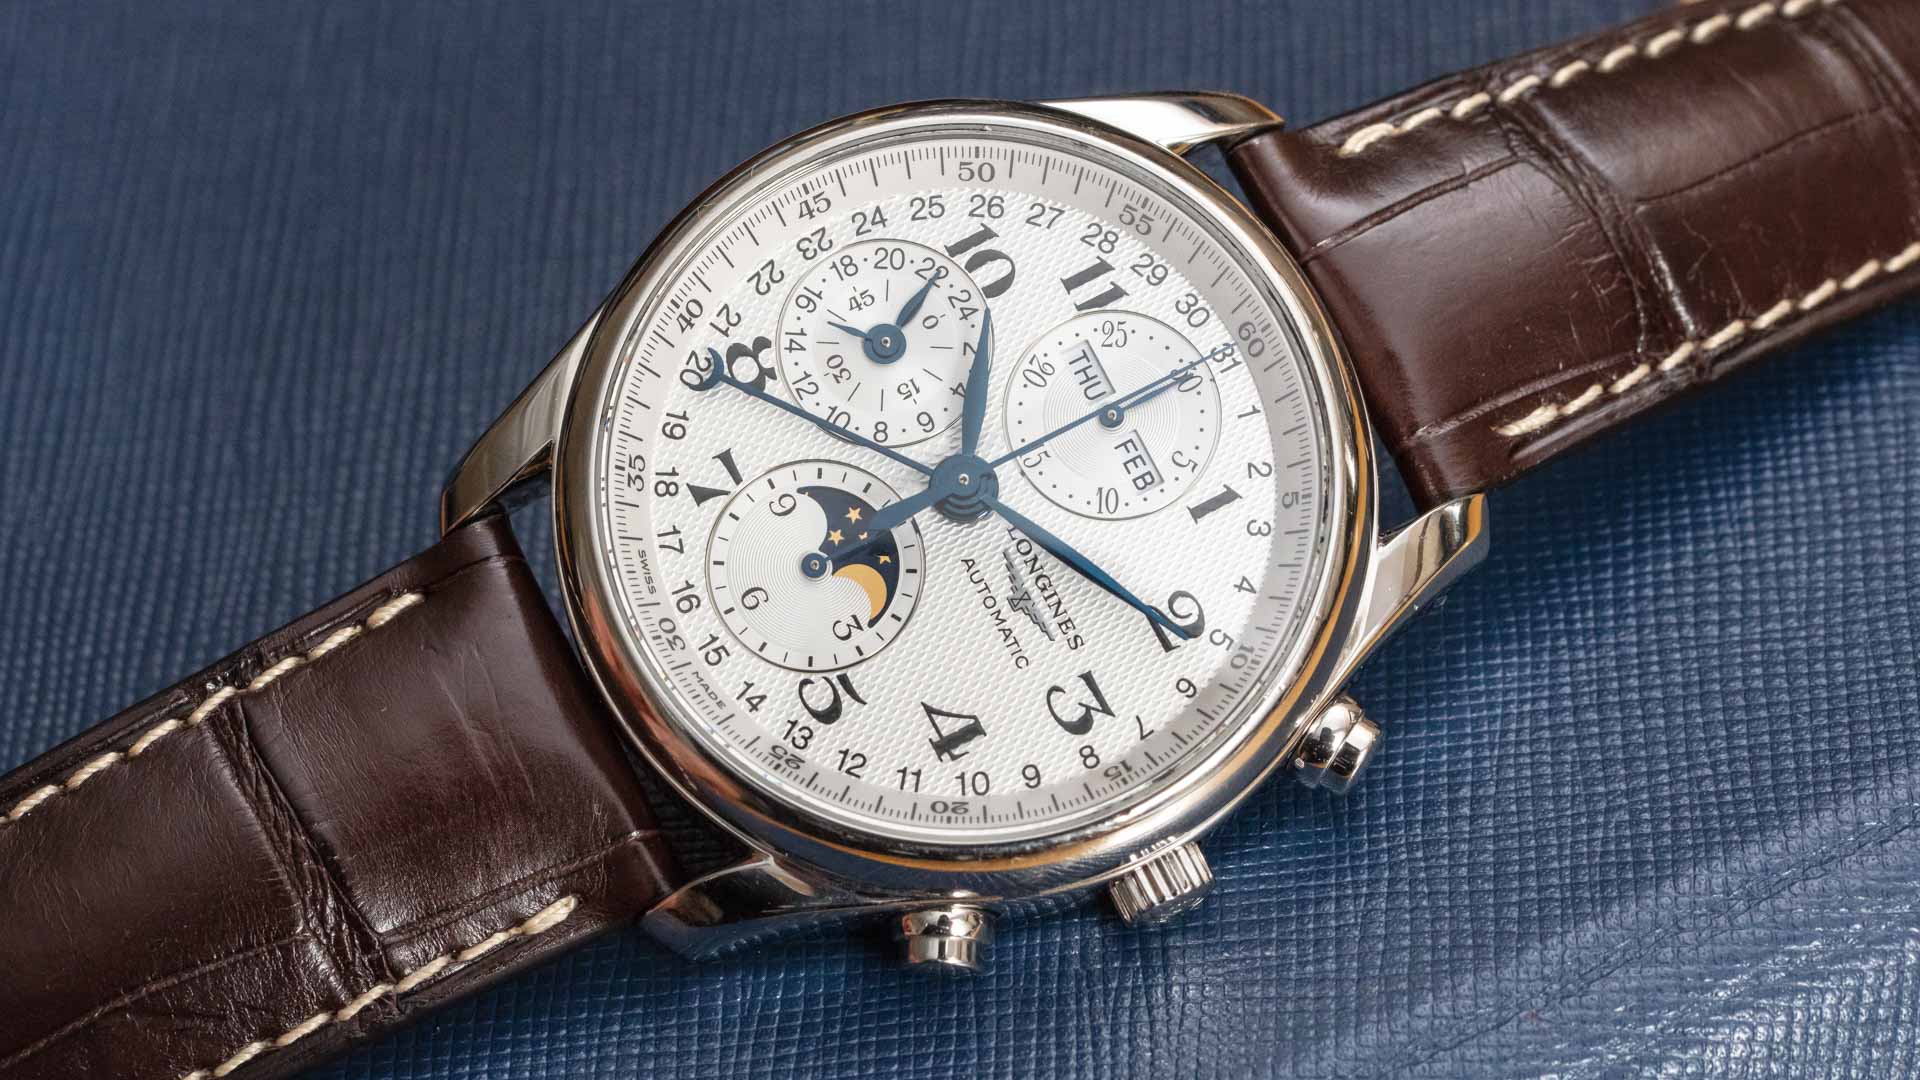 Master collection 2023. Longines Master collection l2.673.4.78.3. Longines Master collection l2.673.4. Longines Master collection Moon phase Chronograph. Longines Master collection Moon phase.